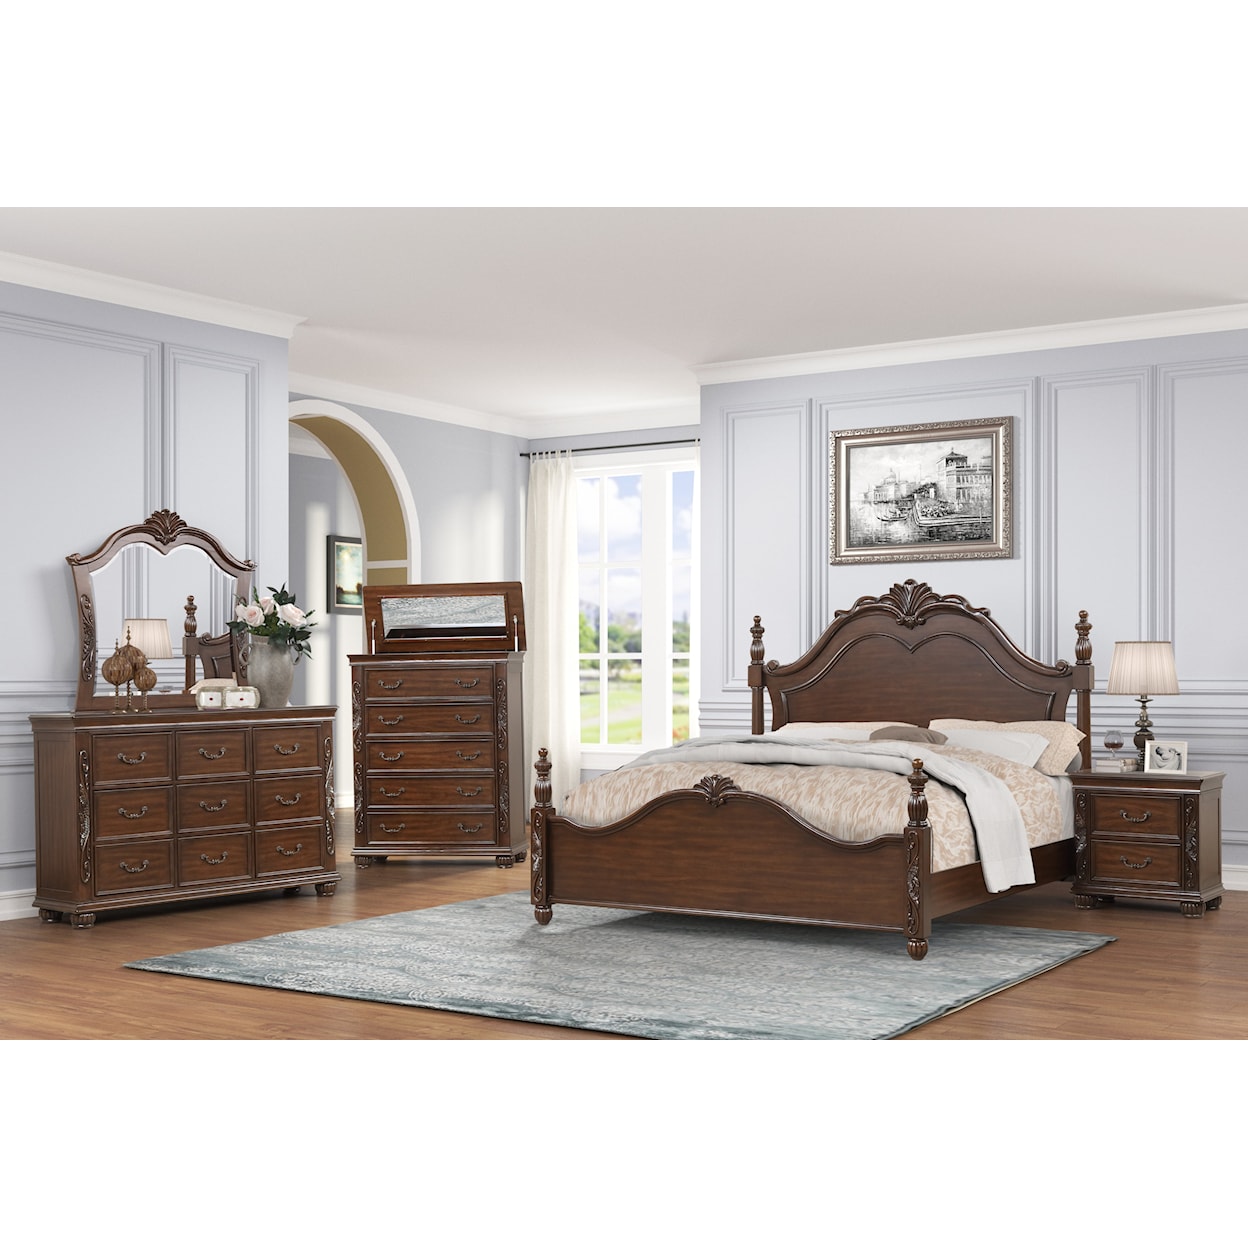 New Classic Vienna King Bedroom Group